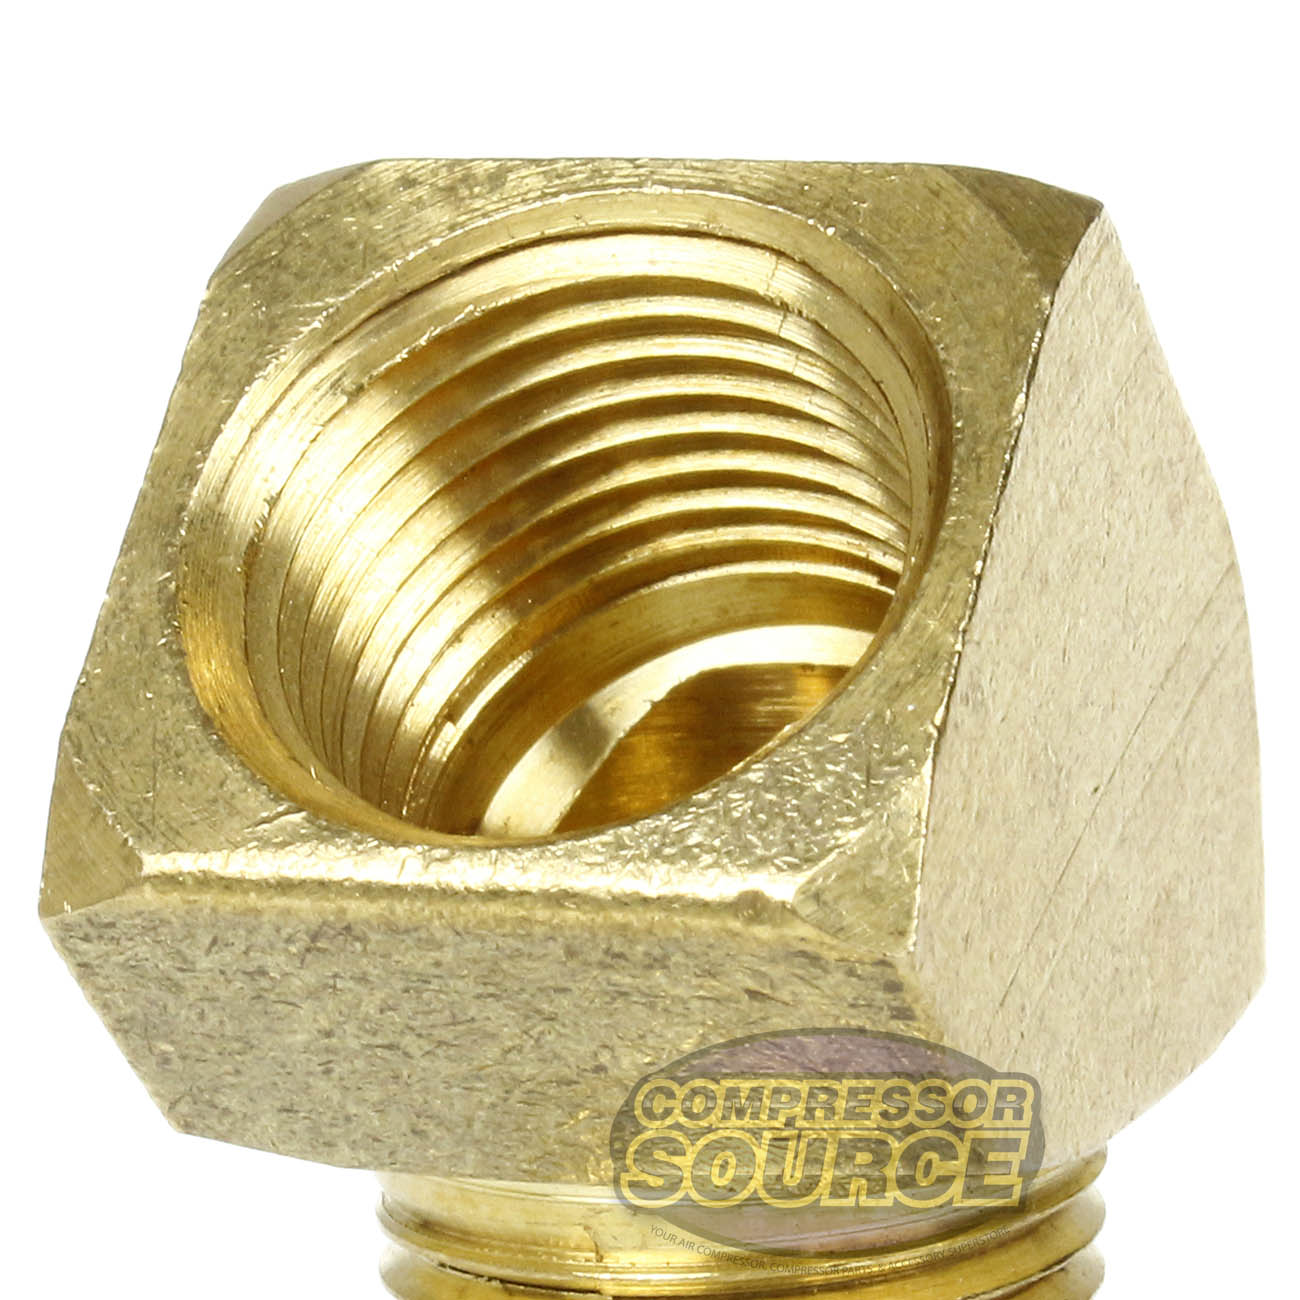 3/8" Male NPTF to Female NPTF 45 Degree Street Elbow Solid Brass Pipe Fitting